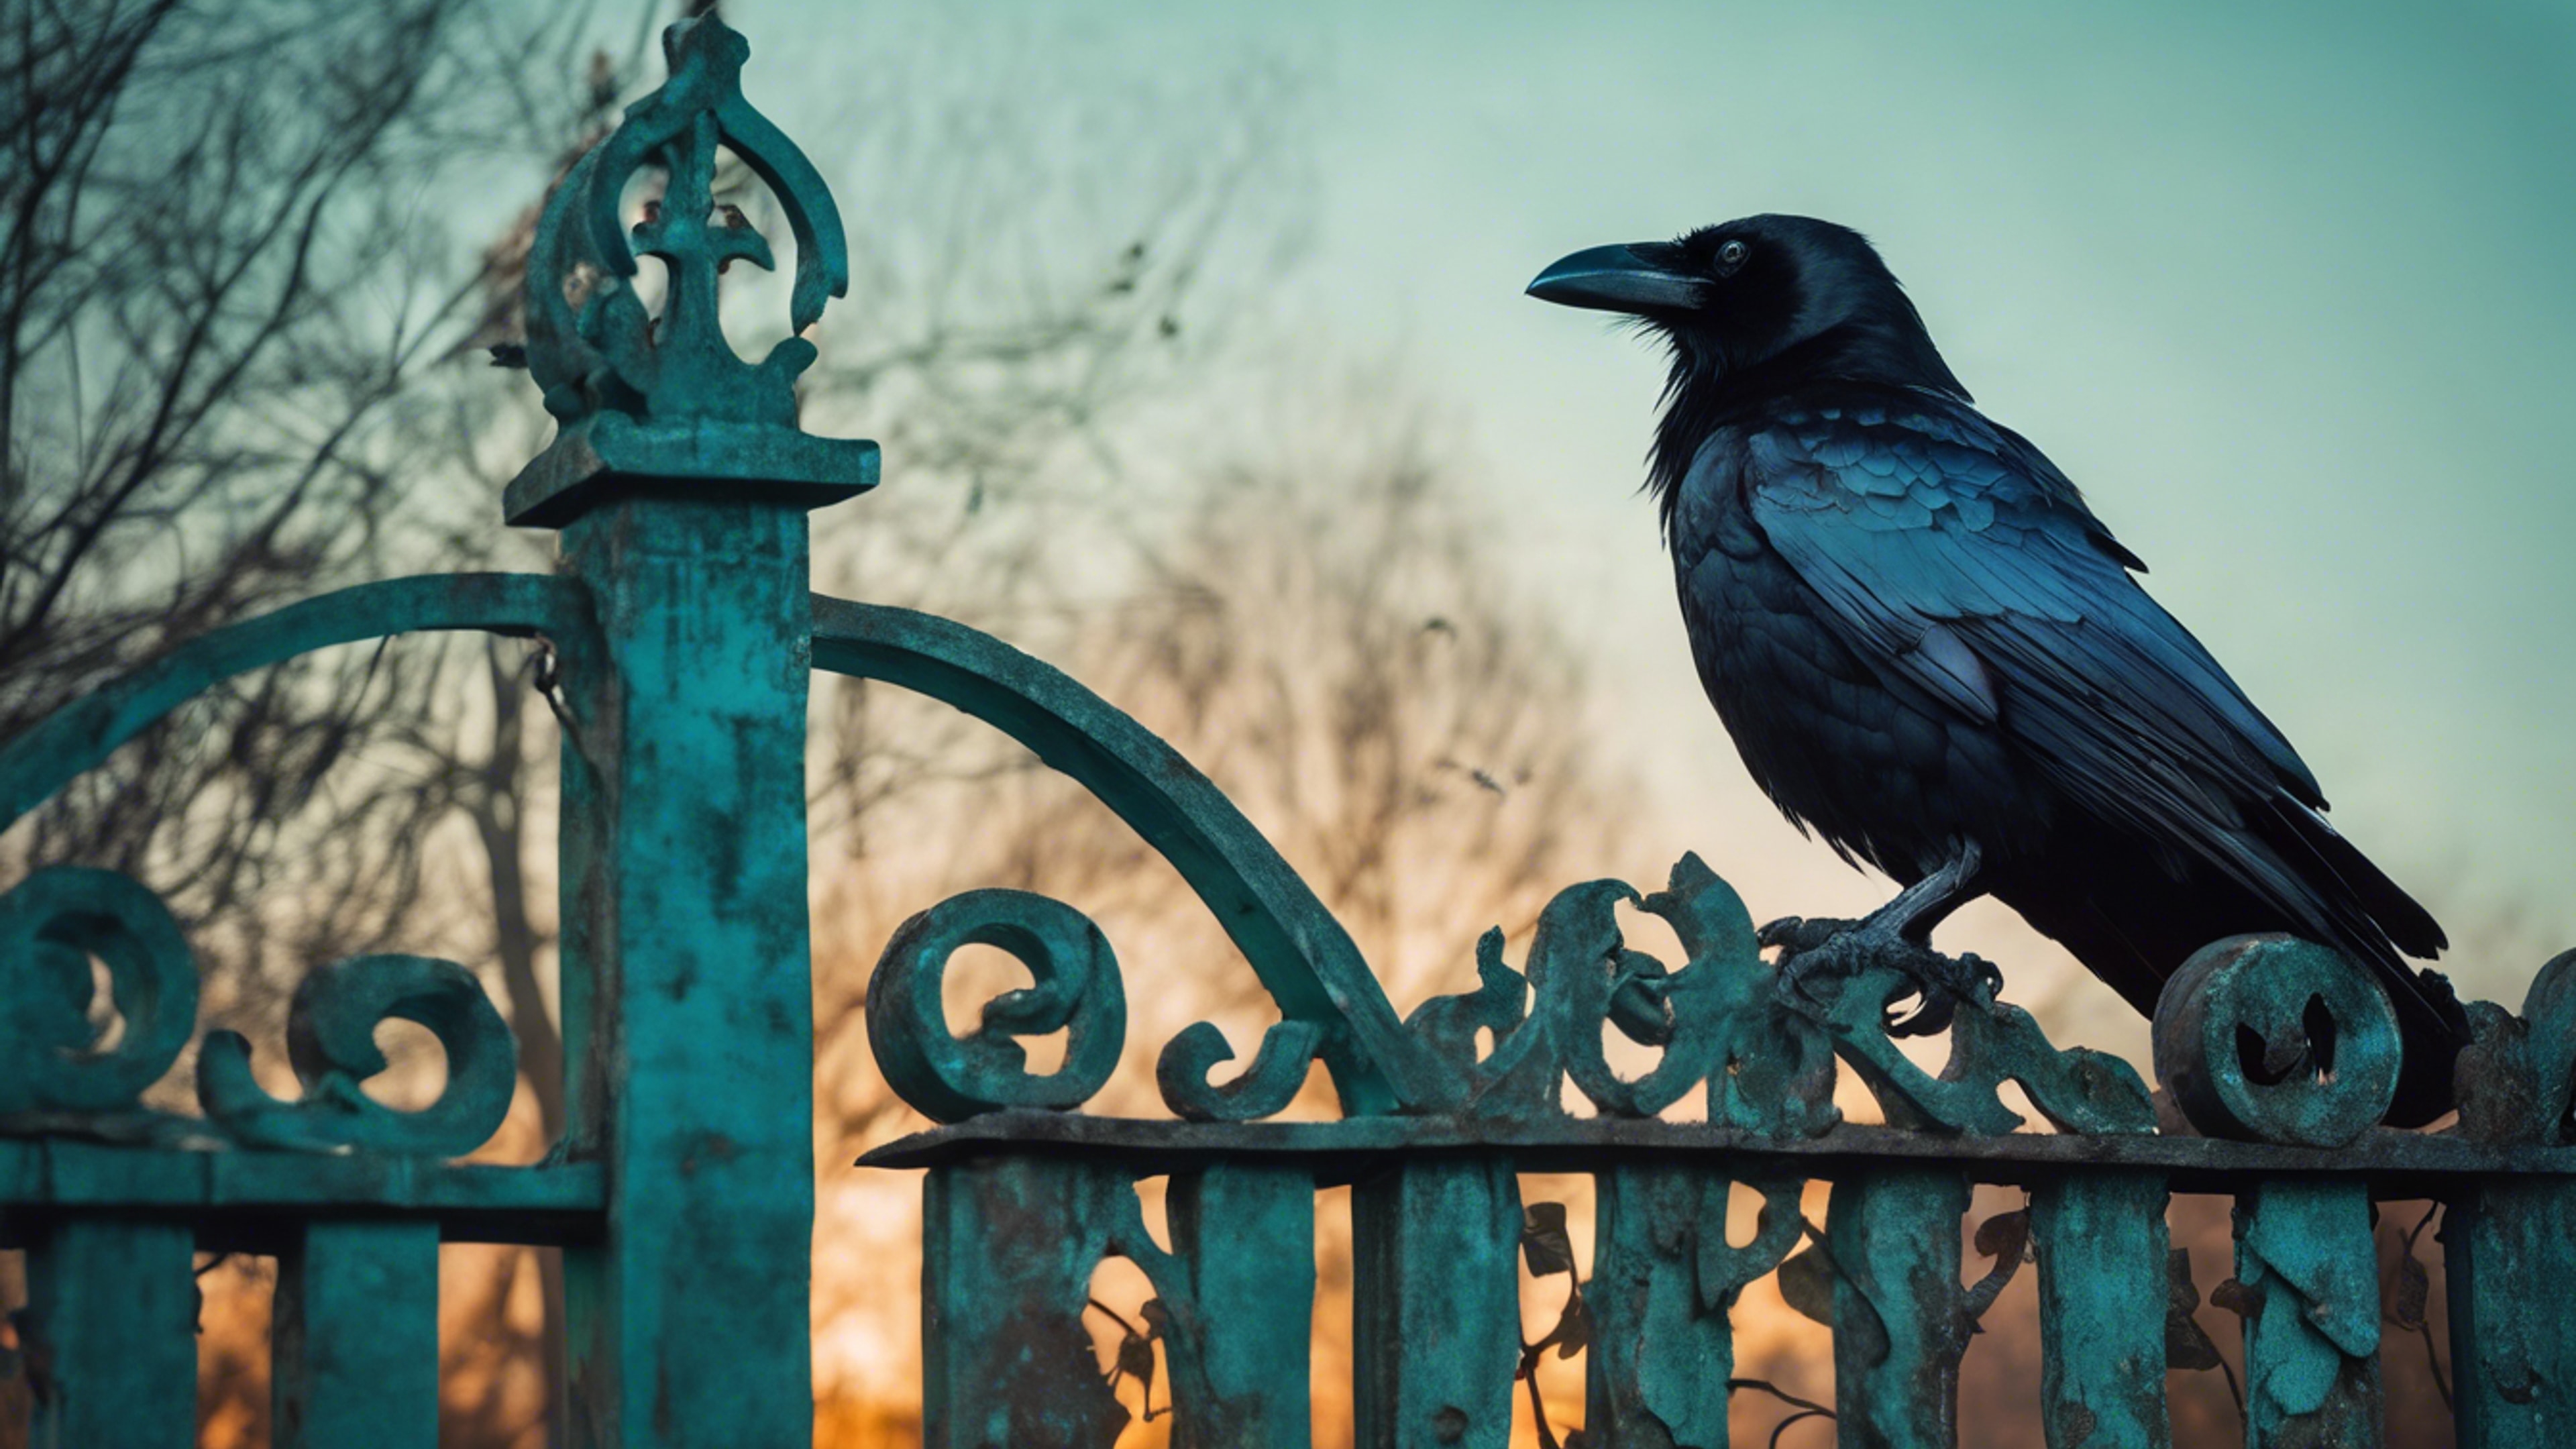 A Gothic raven perched on a dilapidated garden gate, aglow with the mesmerizing light of a teal moon. 牆紙[c5fc313733614ce1ad34]